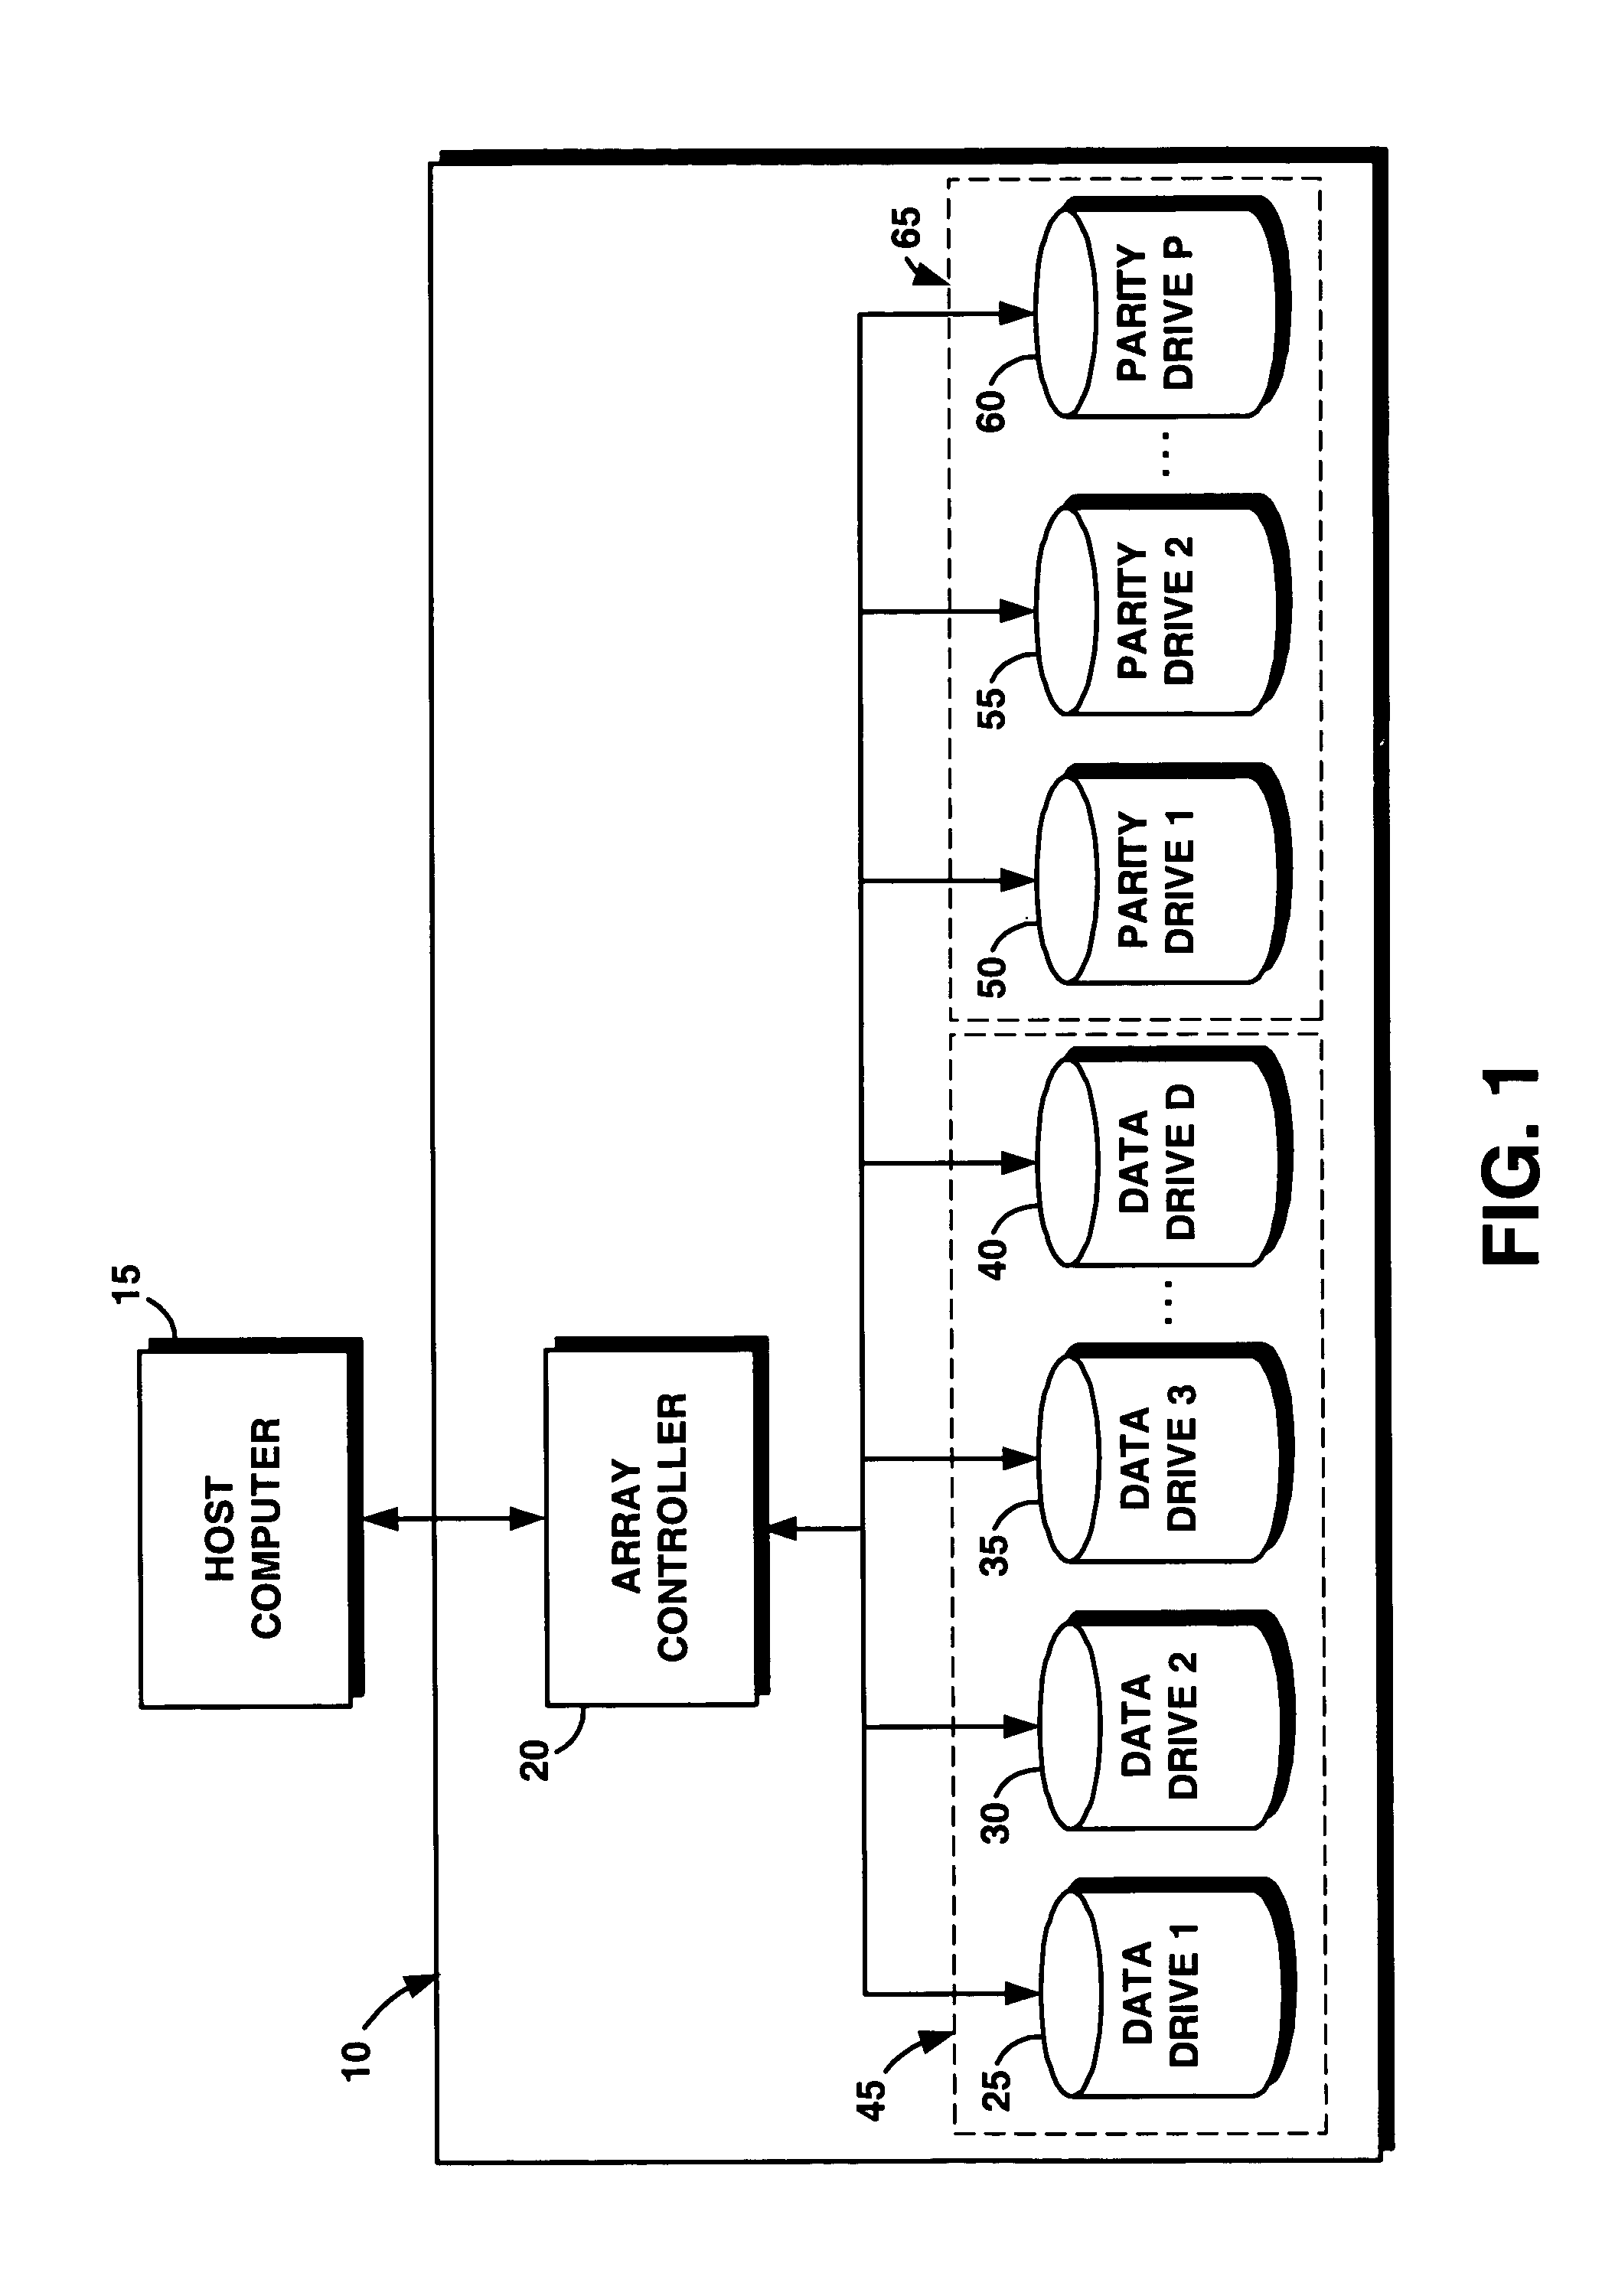 System and method for enabling efficient recovery of data in a storage array